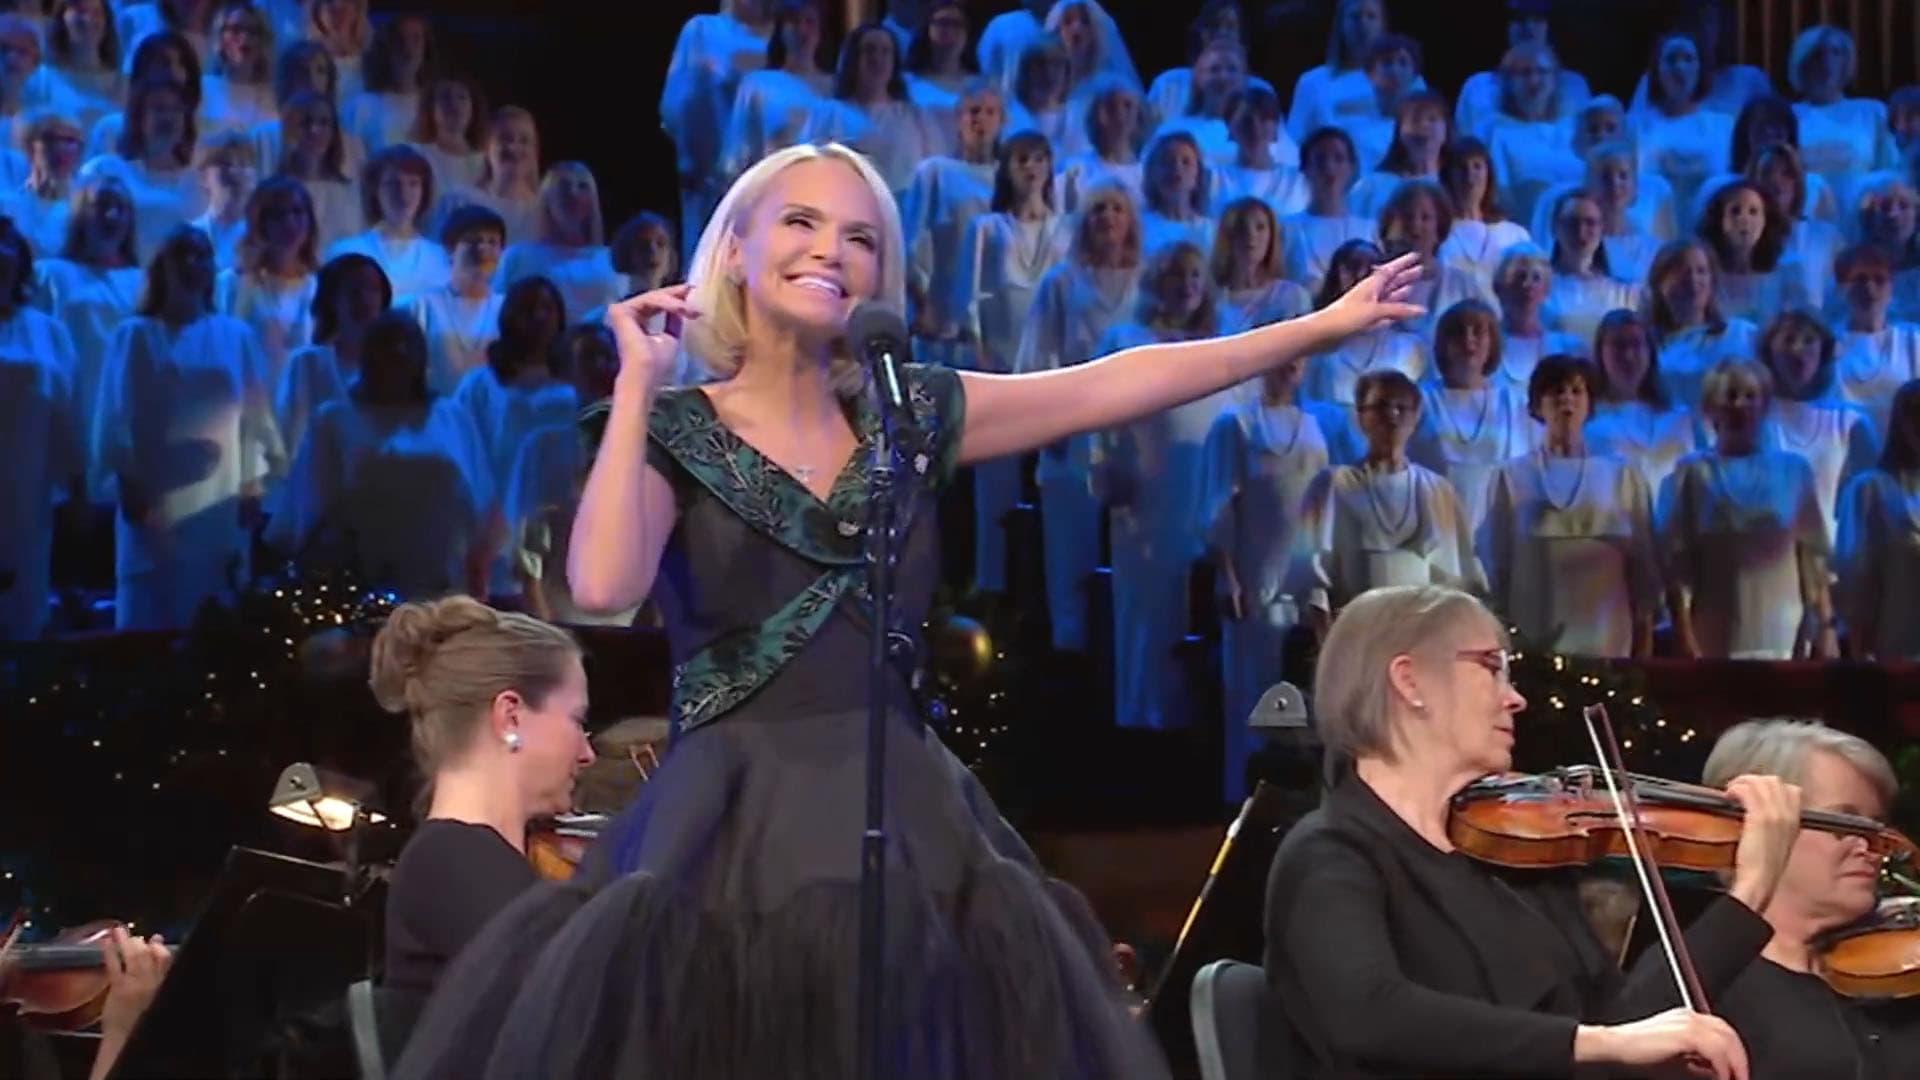 Angels Among Us: The Tabernacle Choir at Temple Square featuring Kristin Chenoweth backdrop